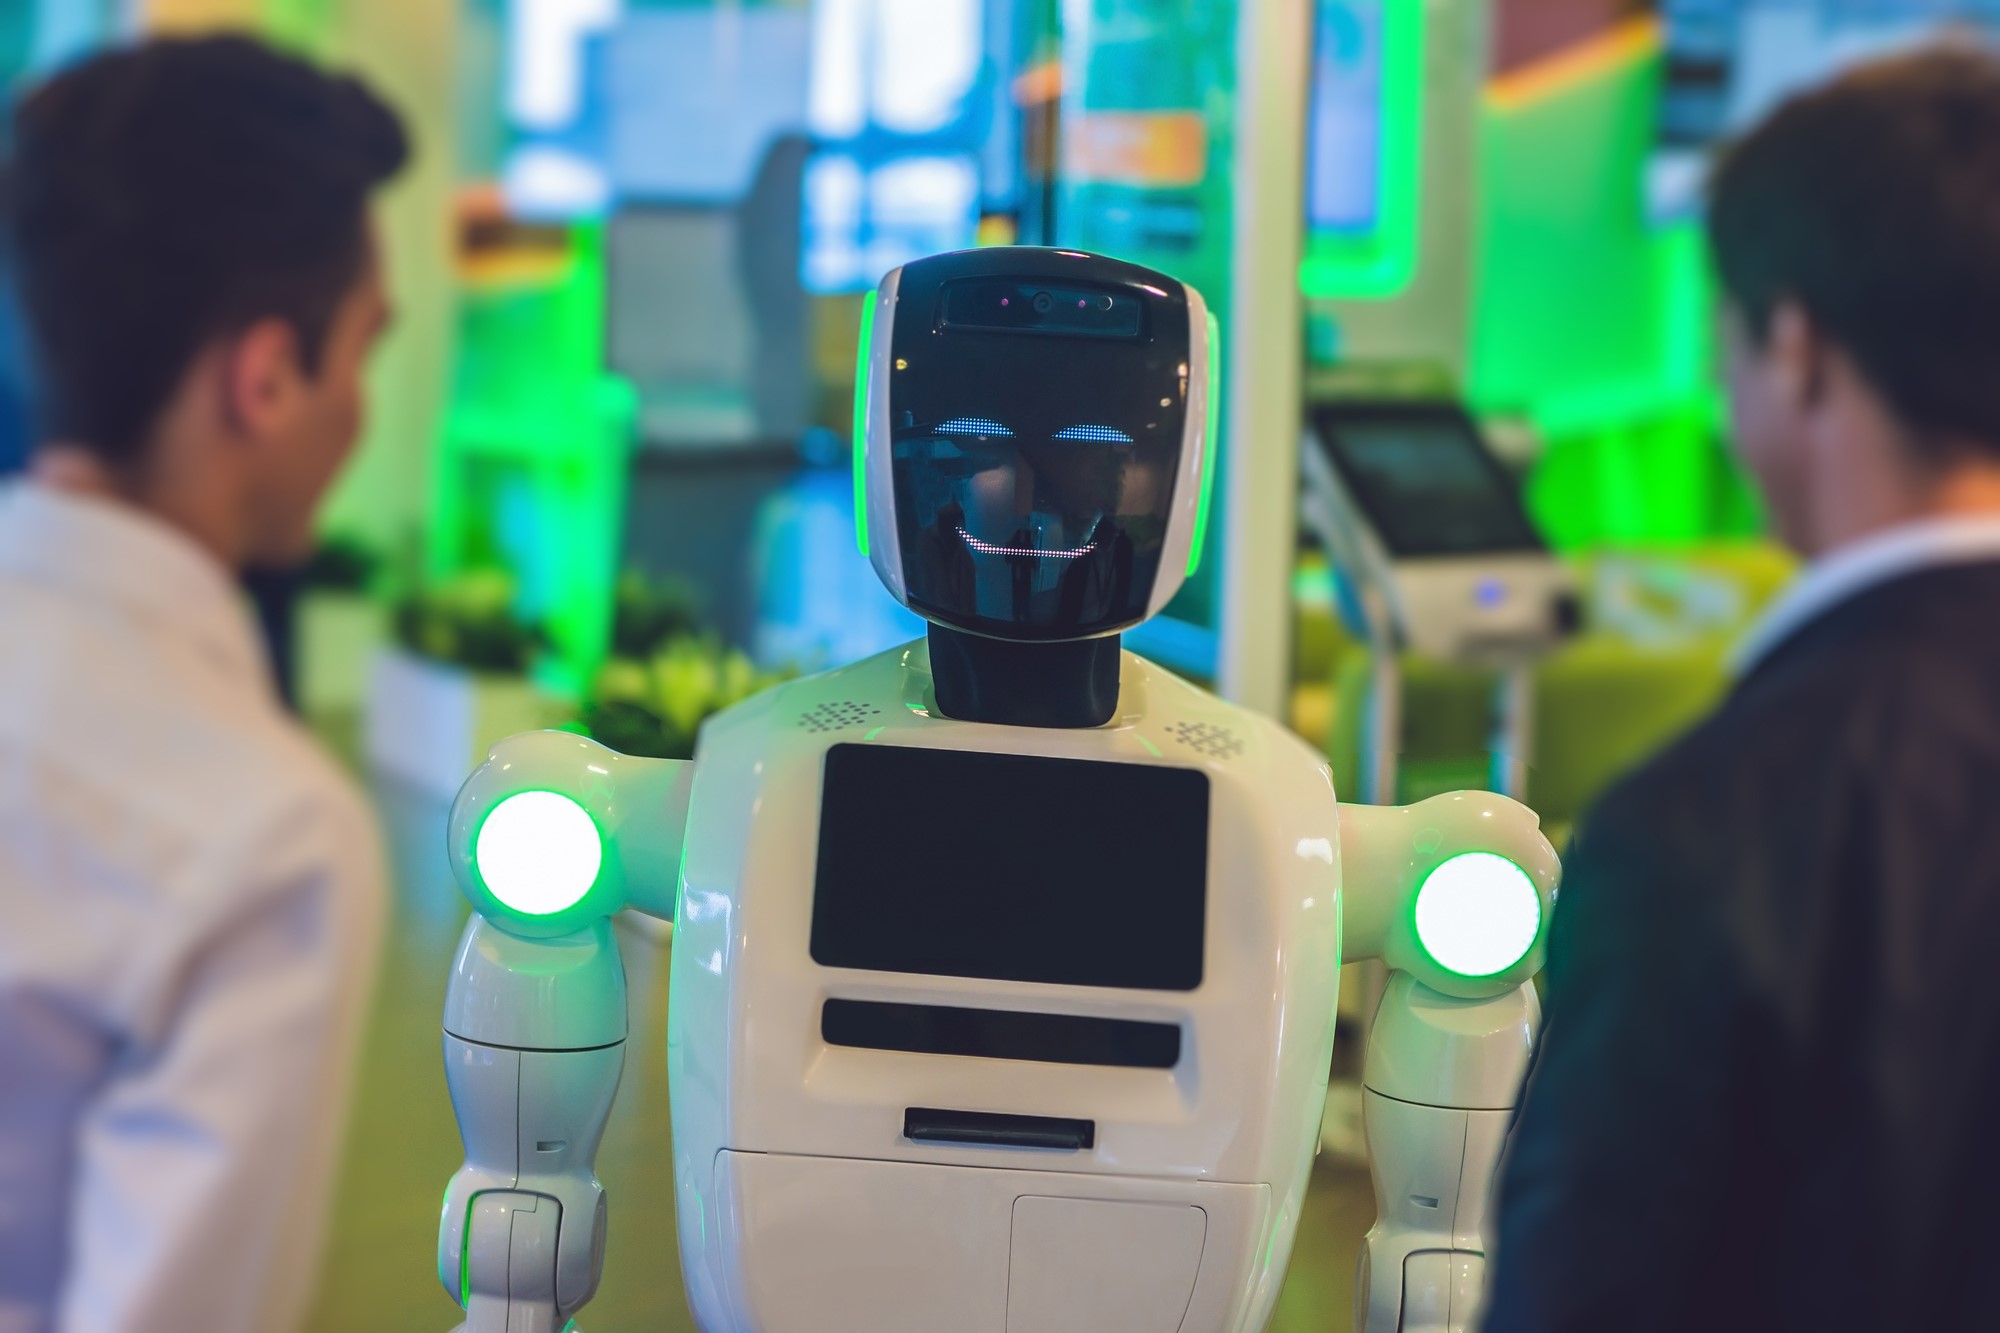 photograph of smiling robot interacting with people at trade show